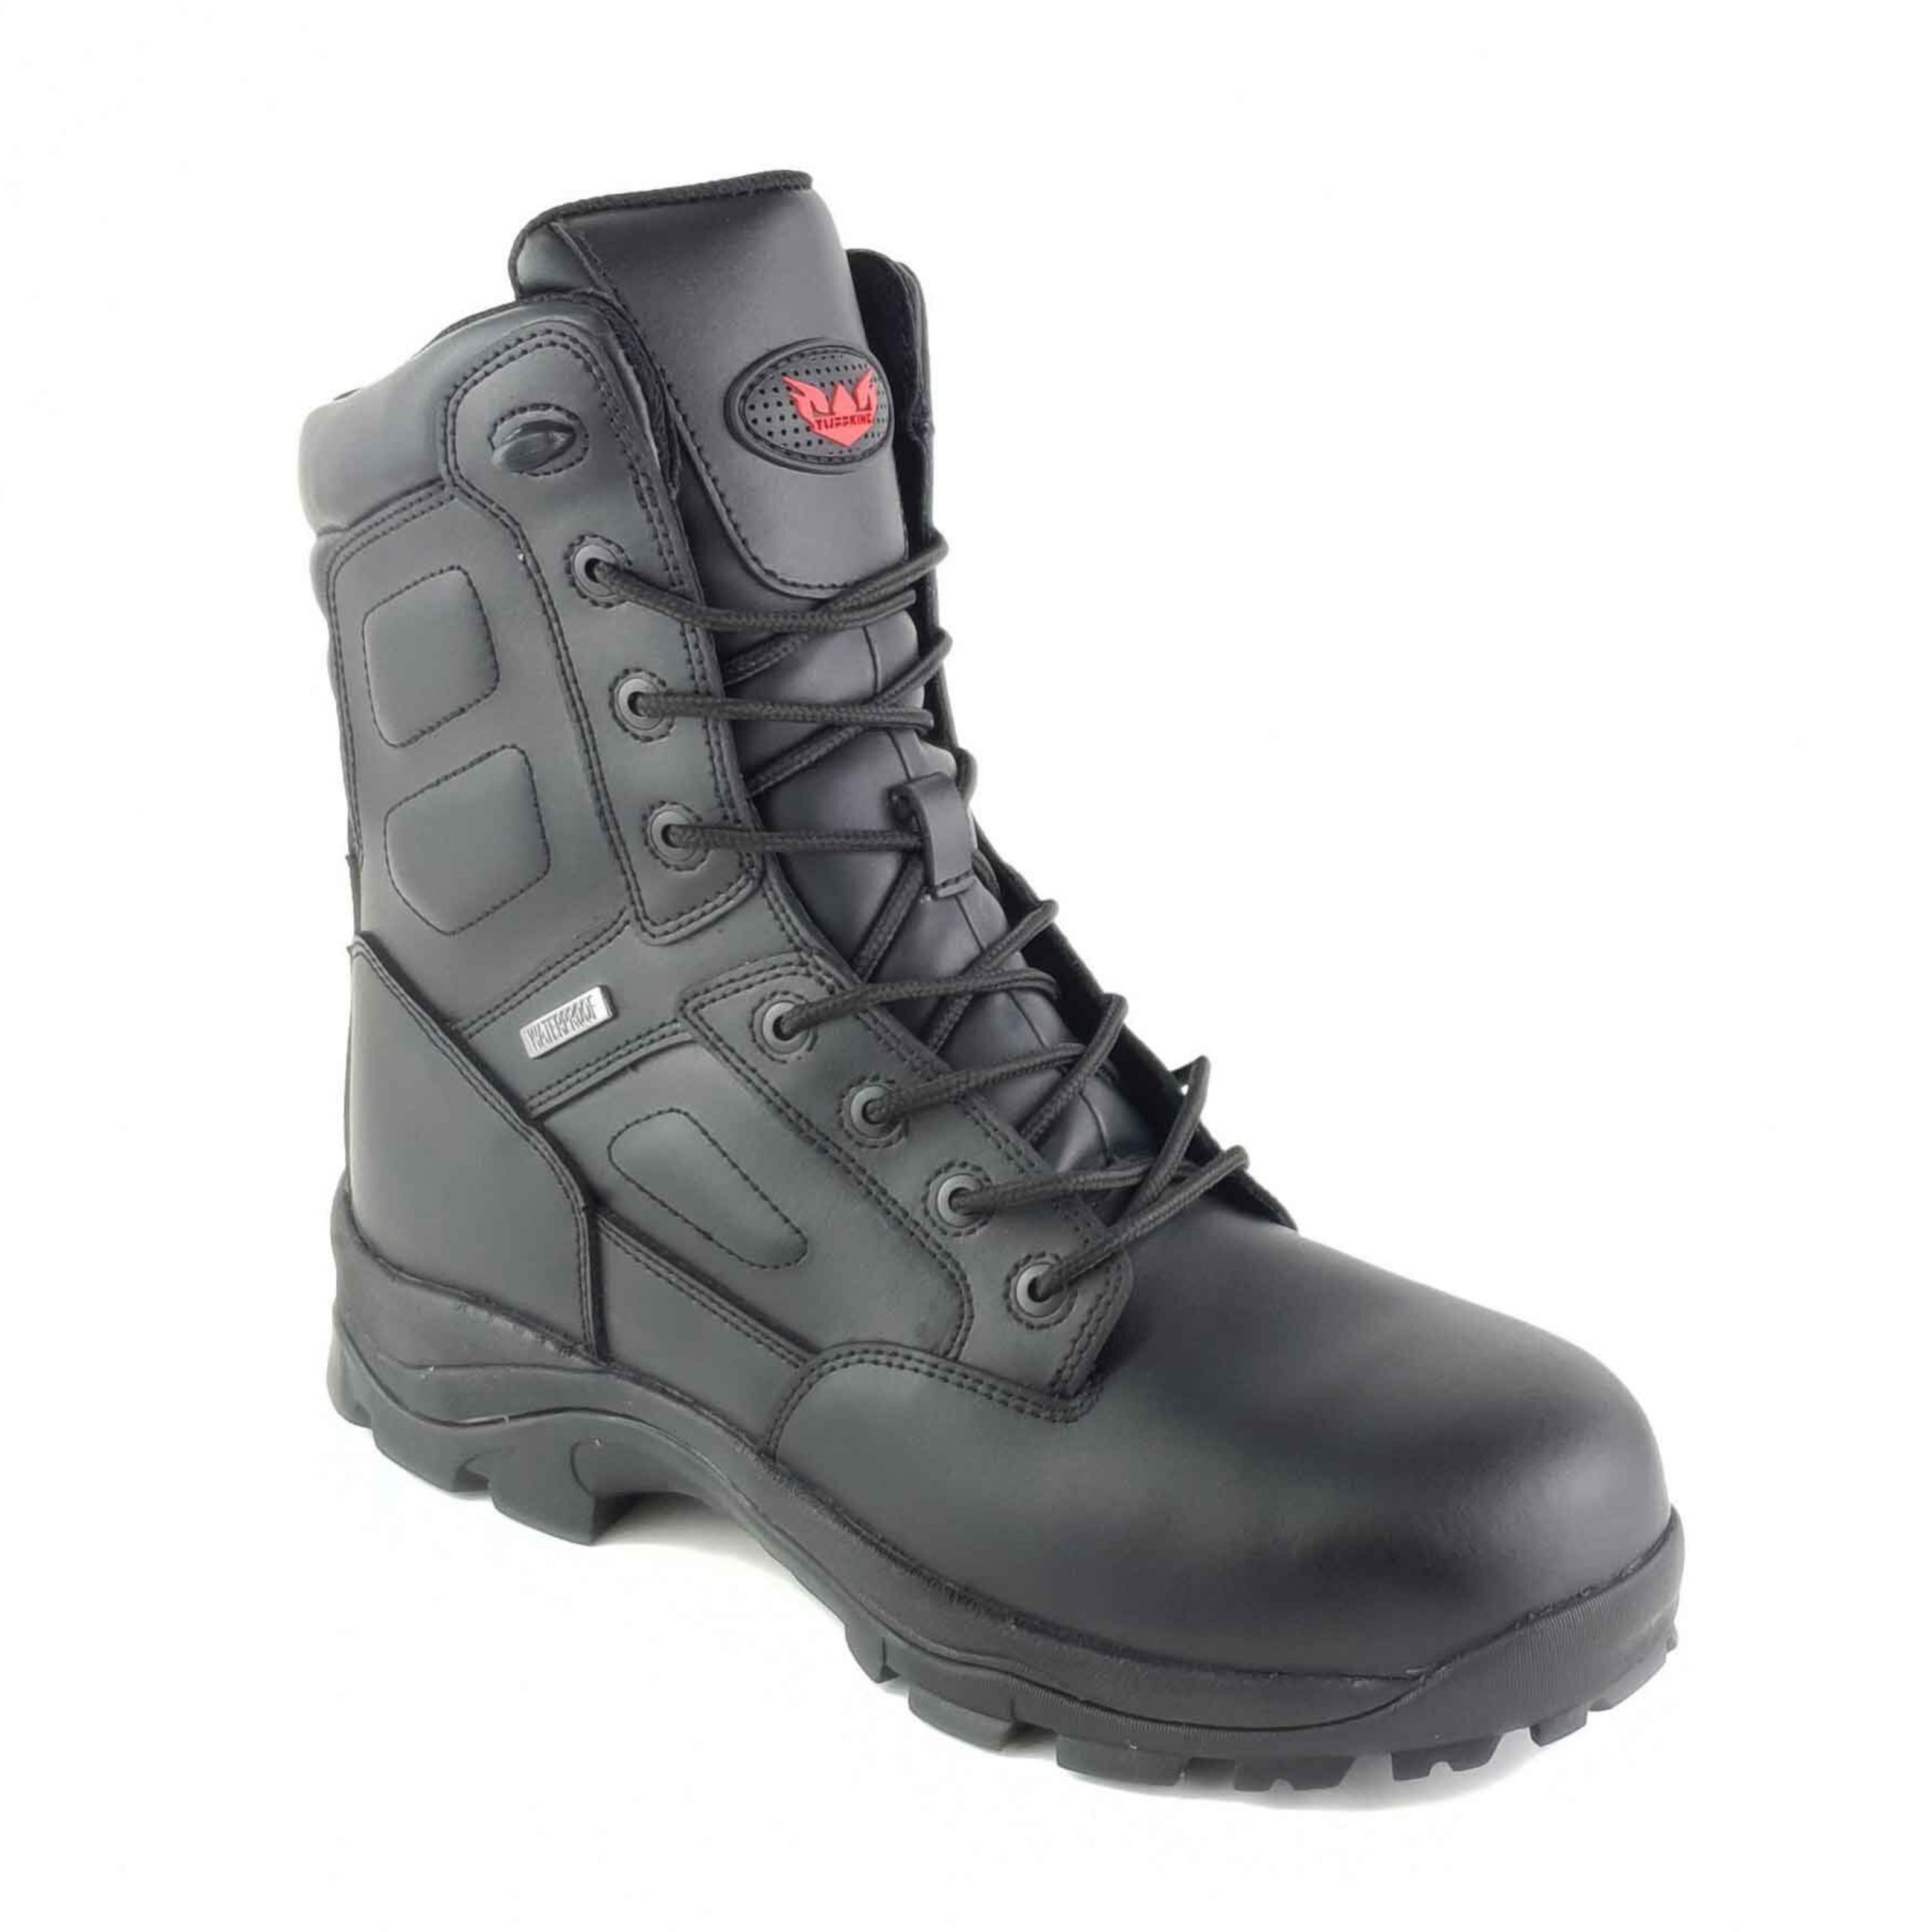 Safety Boots & Shoes from Tuffking